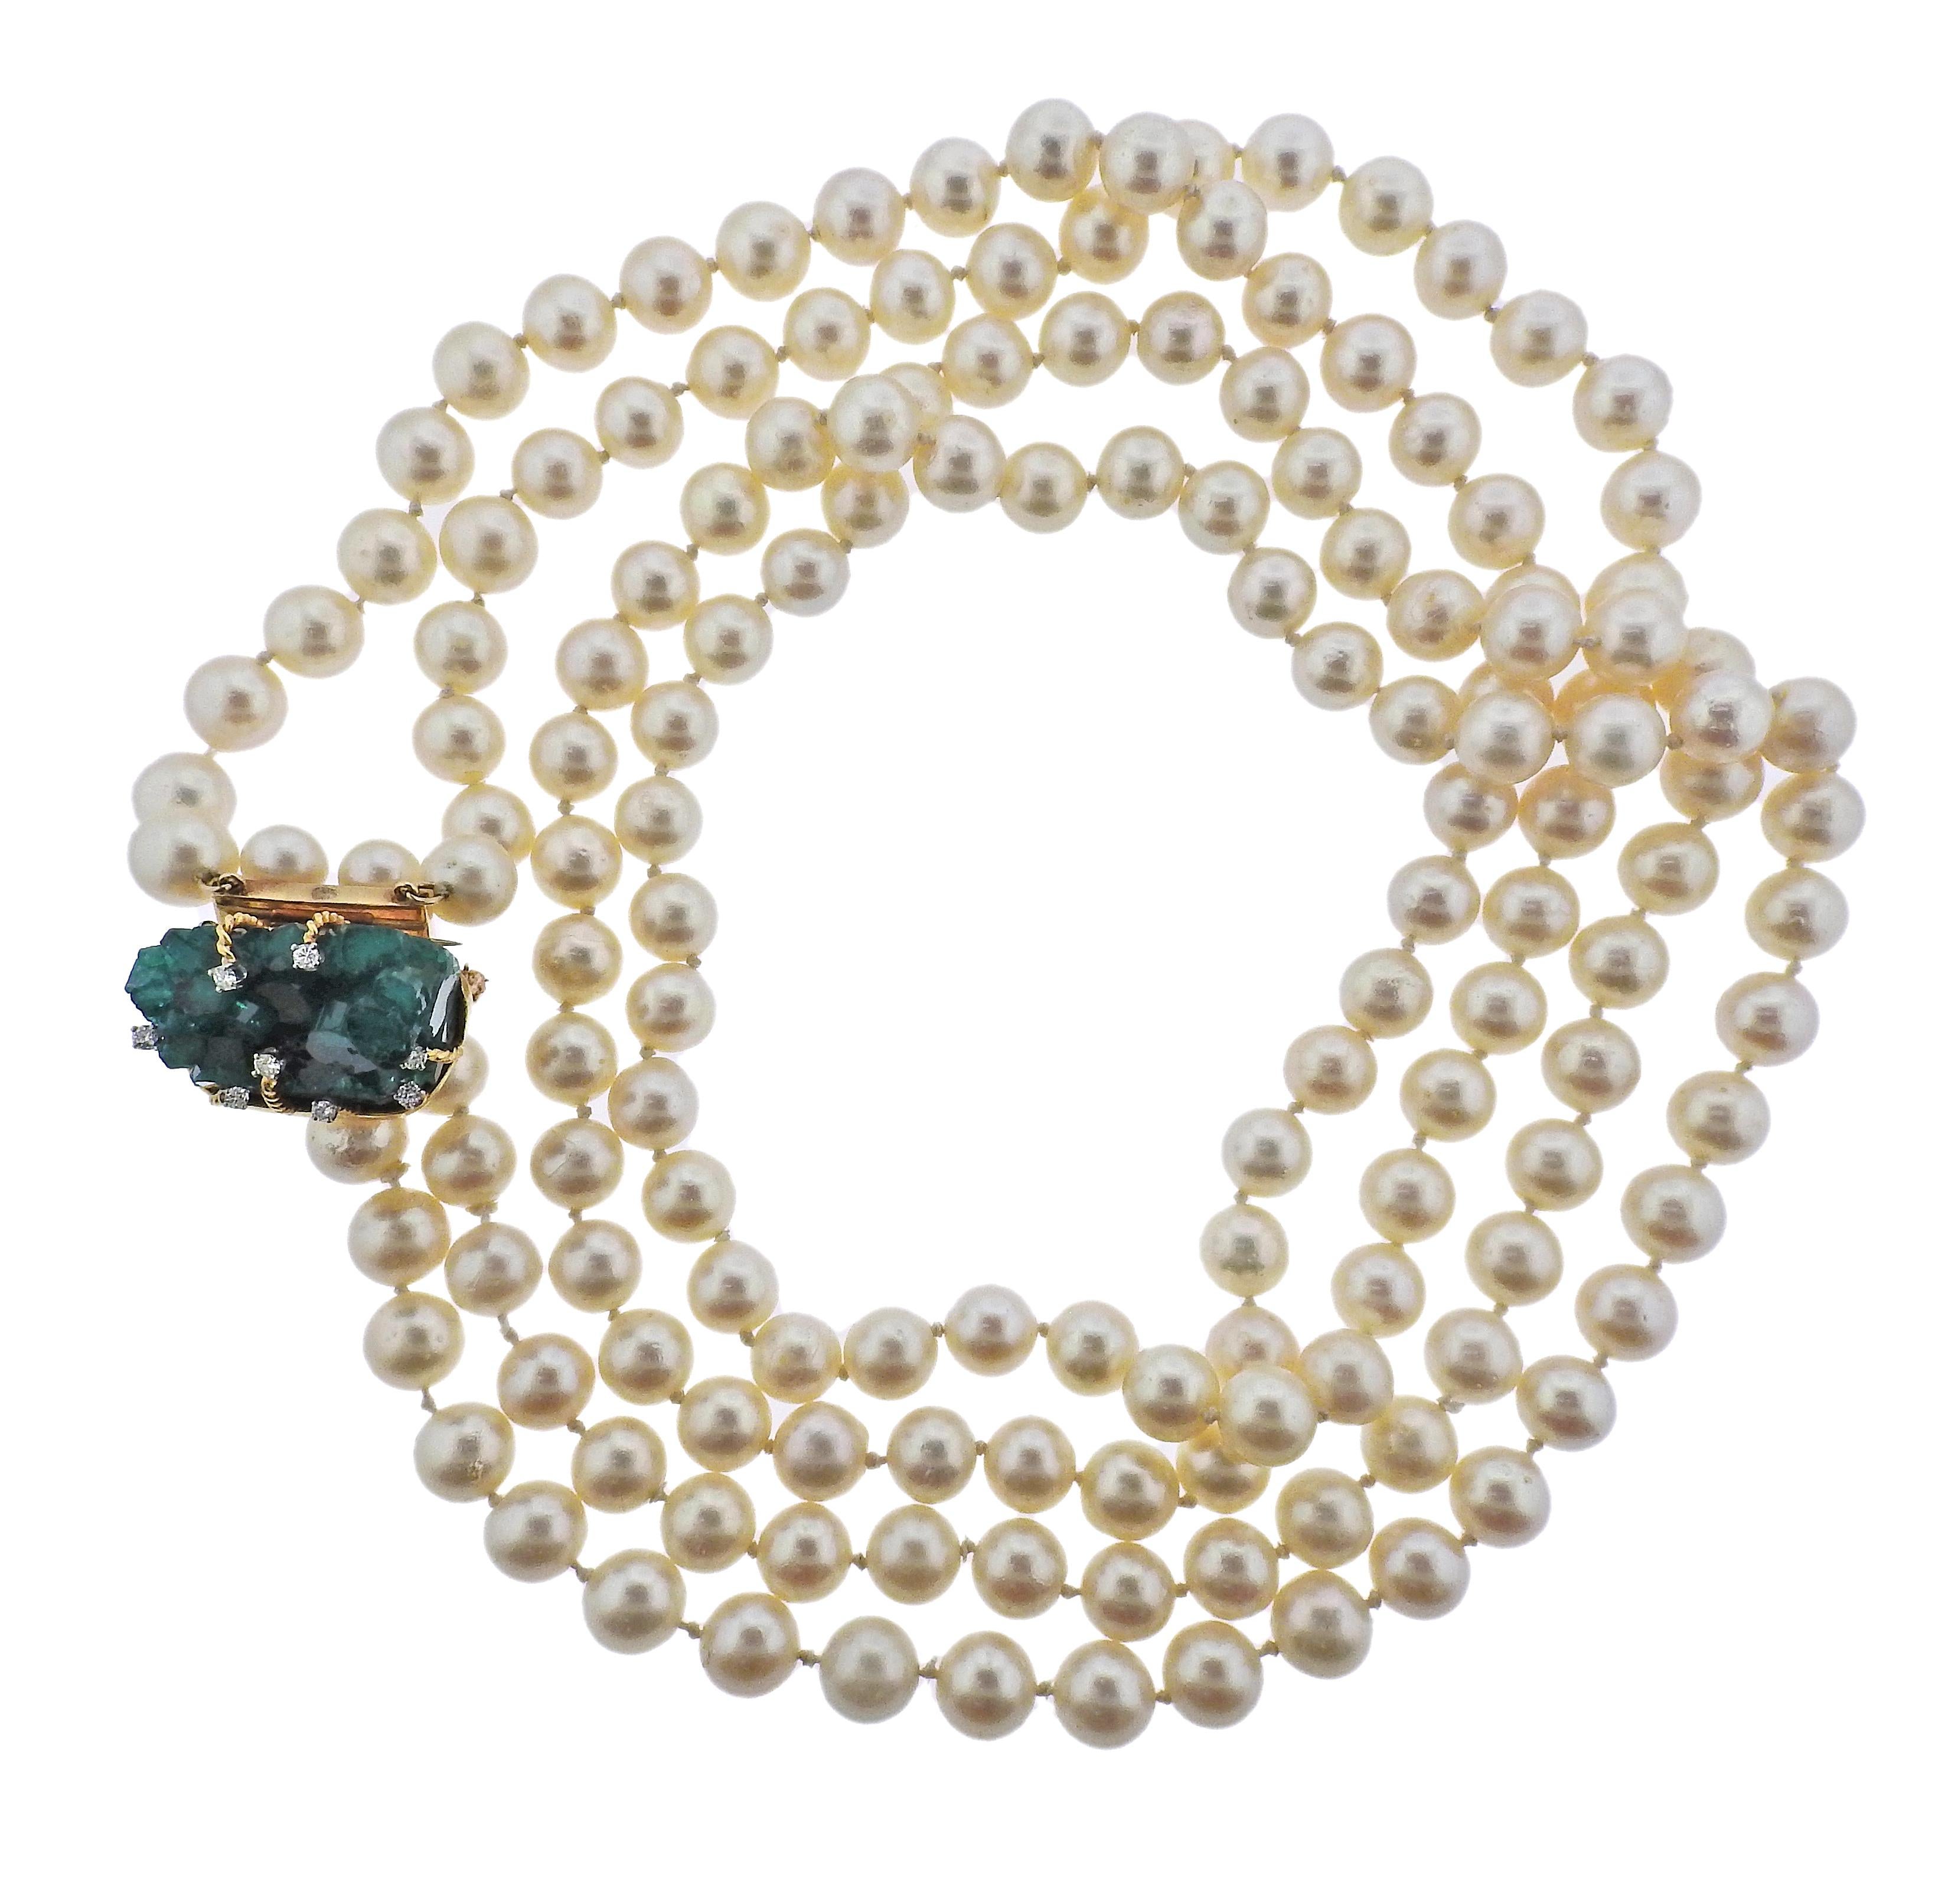 1970s Cellino 18k gold necklace, set with Chatham emeralds, pearls measuring 7.5-8.5mm pearls and approx. 0.24ctw in diamonds. Necklace is 31